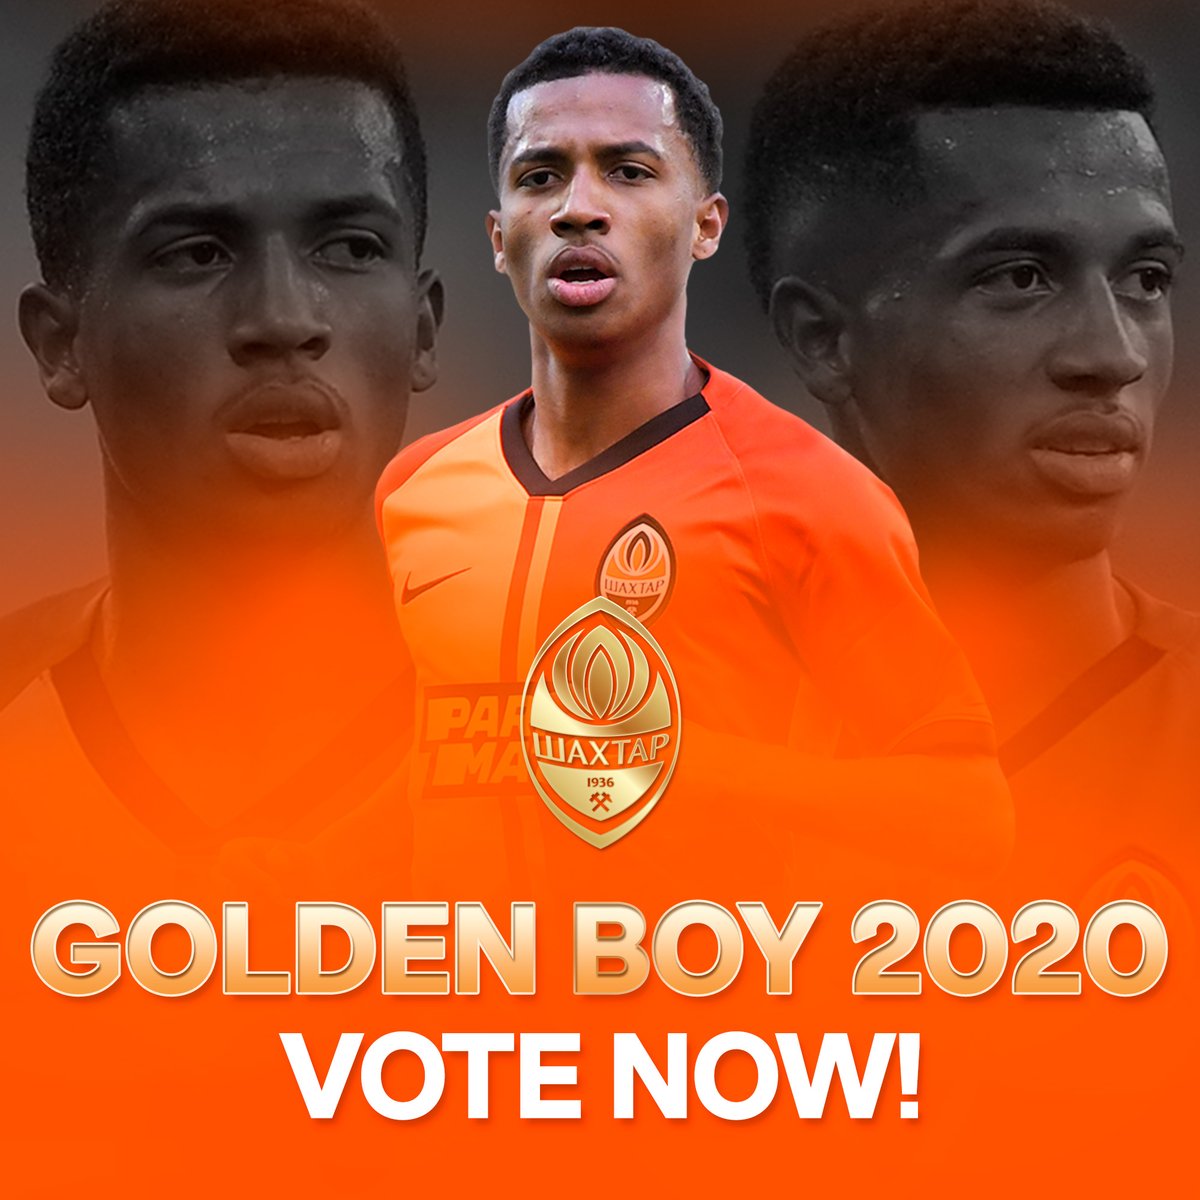 Fc Shakhtar English Marcos Antonio Has Been Nominated For The Golden Boy Award Support The Midfielder By Voting At T Co Ftzpse5v8g T Co L7qtrvez8r